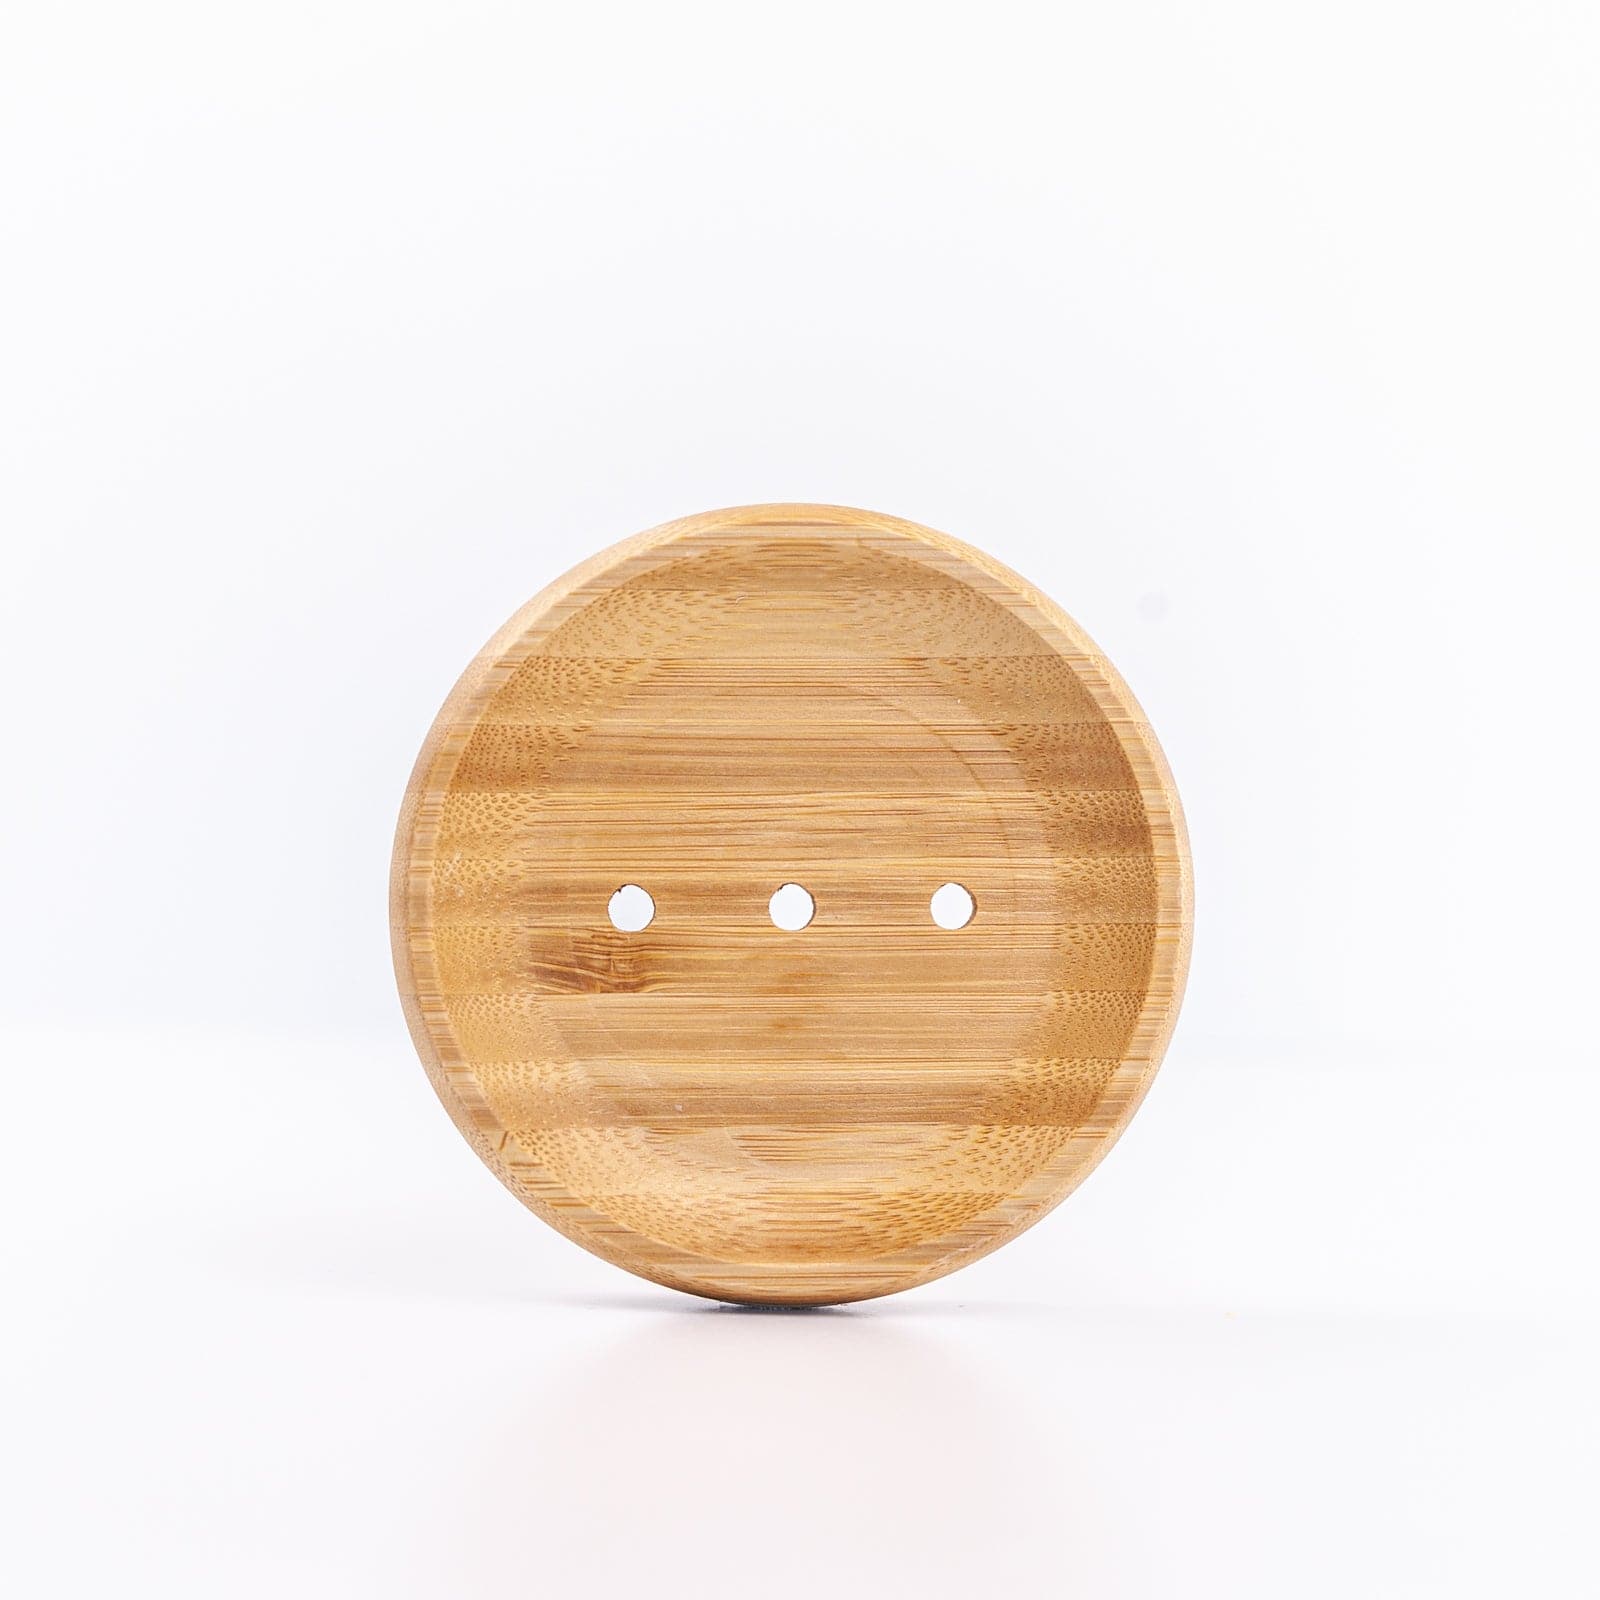 Round wooden soap dish rightside up